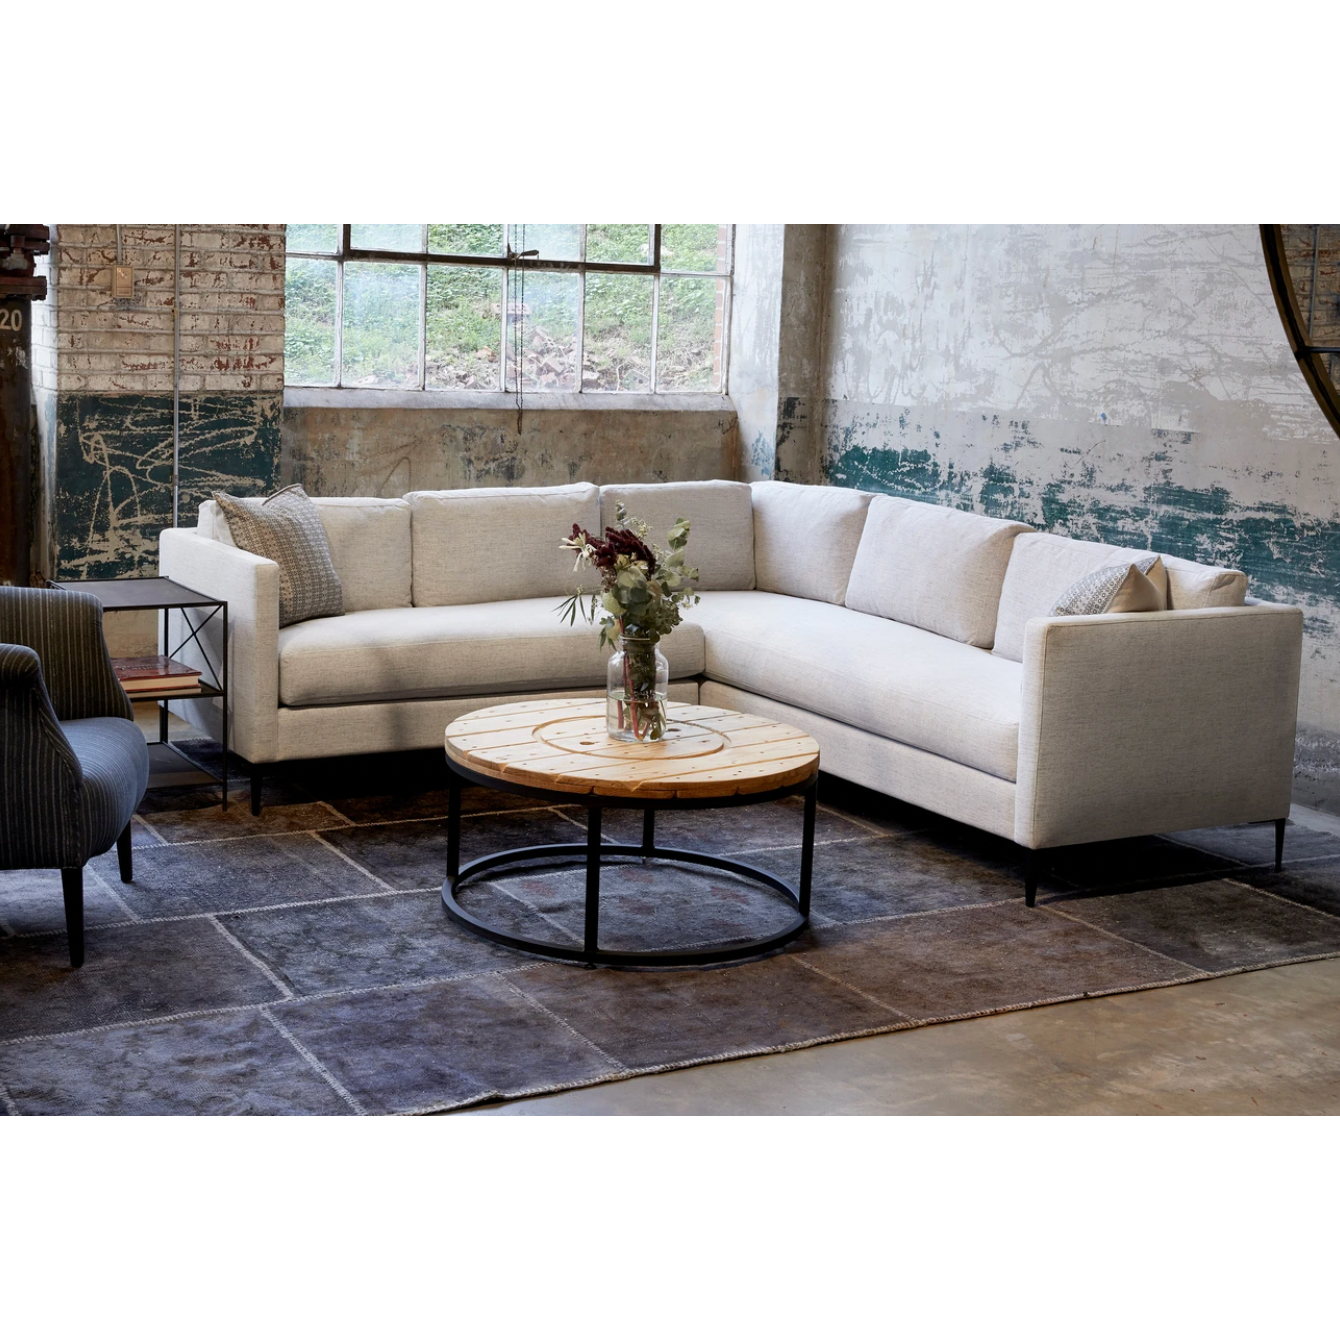 The Benedict 2 Arm Sectional - Essentials by Cisco Brothers is a modern design with clean lines and sleek metal legs in black rust. It has a fresh and functional aesthetic with no-sag support. Photographed in Vanocur Natural and Navedo Gravel.  Overall: 96"w x 96"d x 29"h